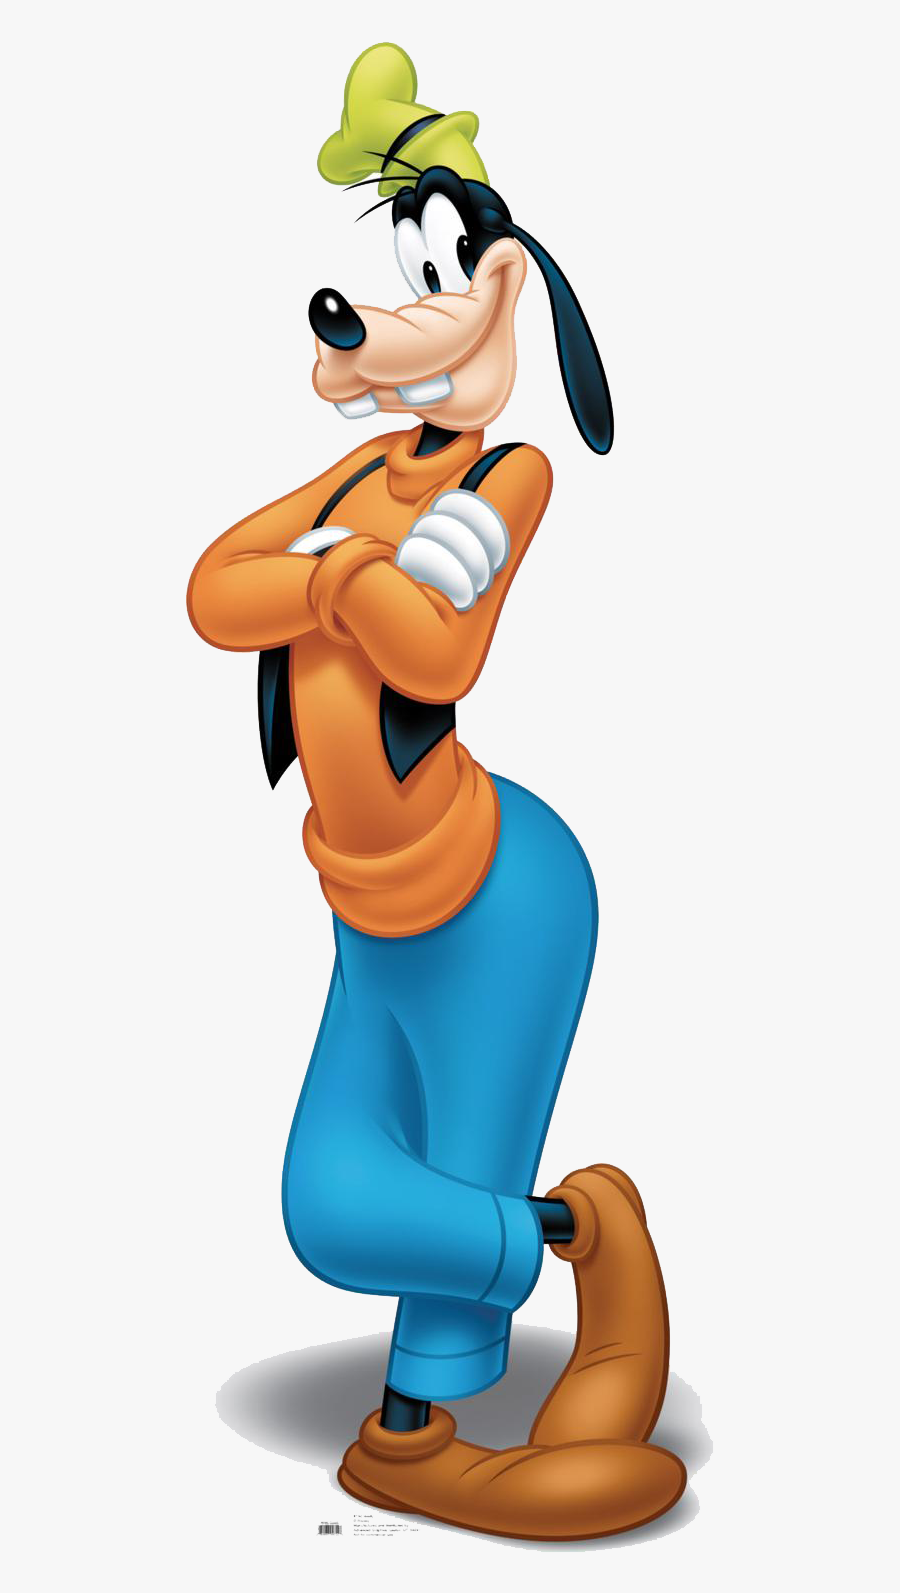 Goofy Png Image - Goofy Mickey Mouse , Free Transparent Clipart